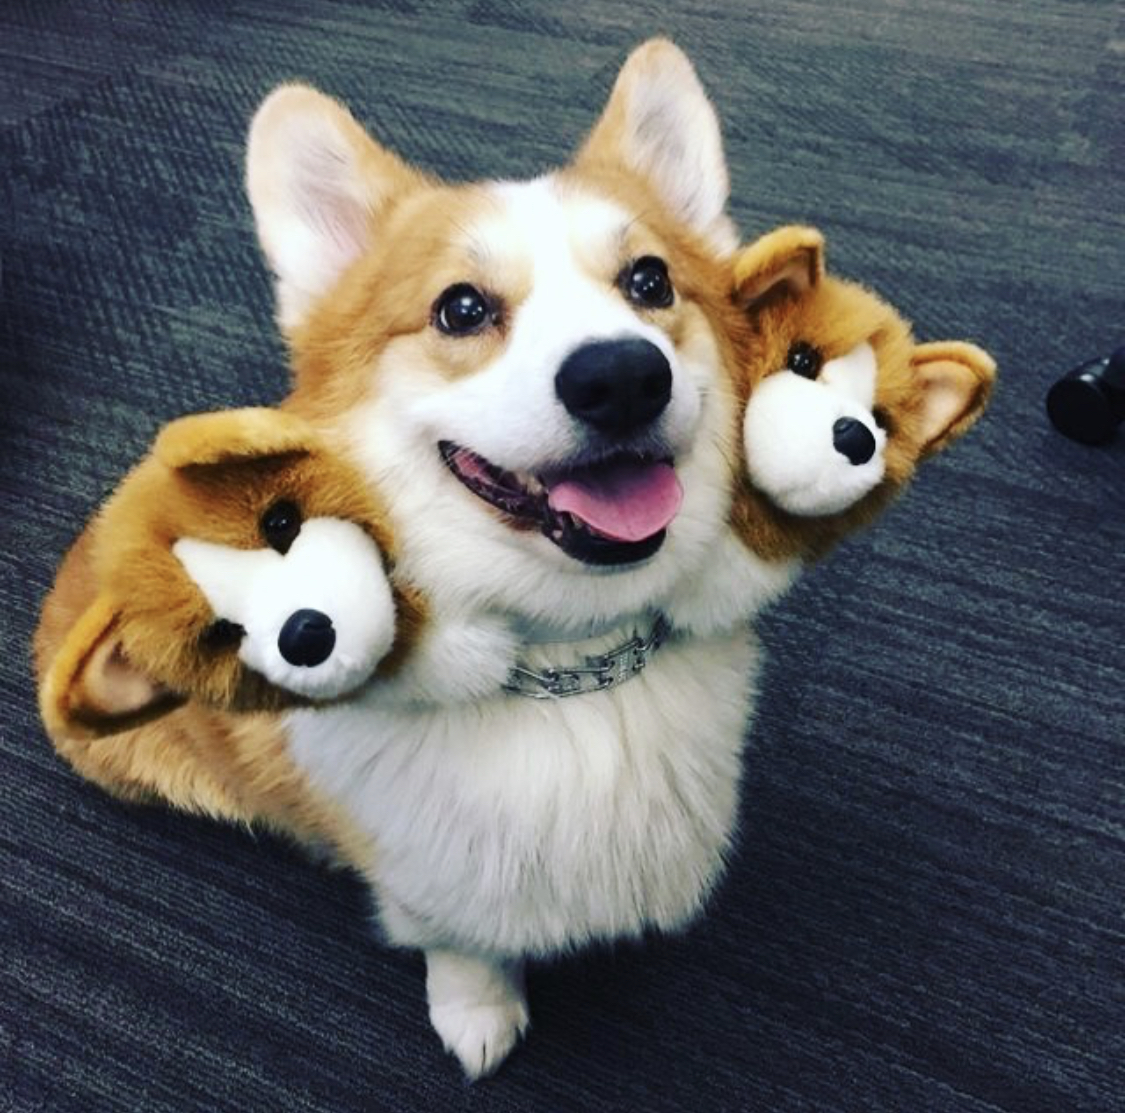 Corgi sitting on the floor wearing collar with two faces of corgi stuffed toys on the side of its smiling face